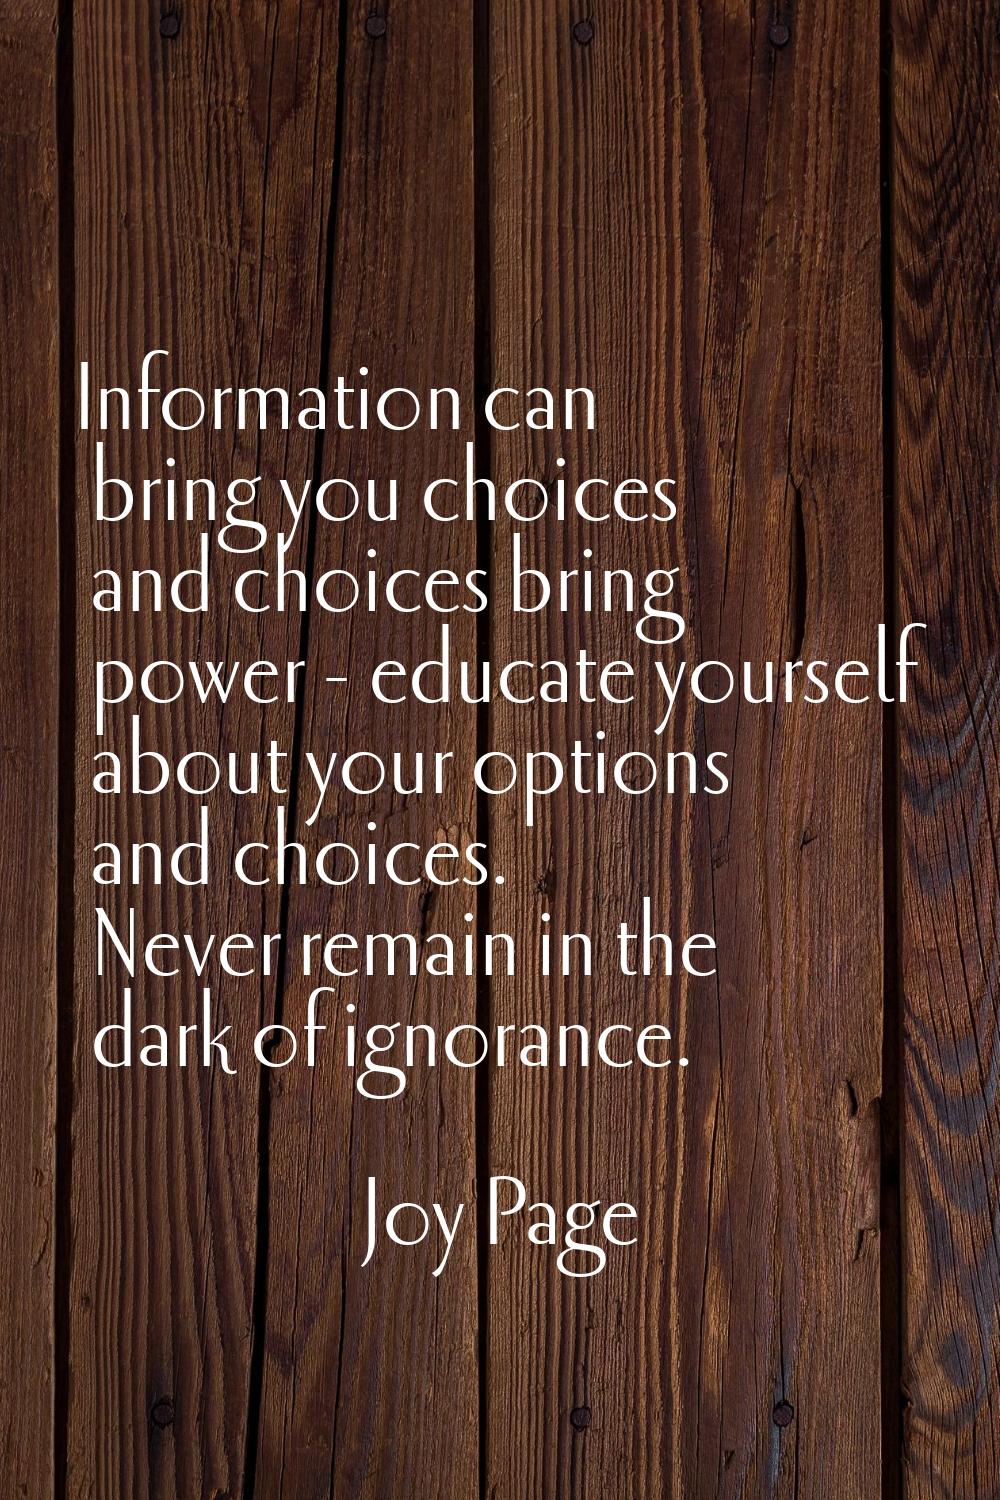 Information can bring you choices and choices bring power - educate yourself about your options and